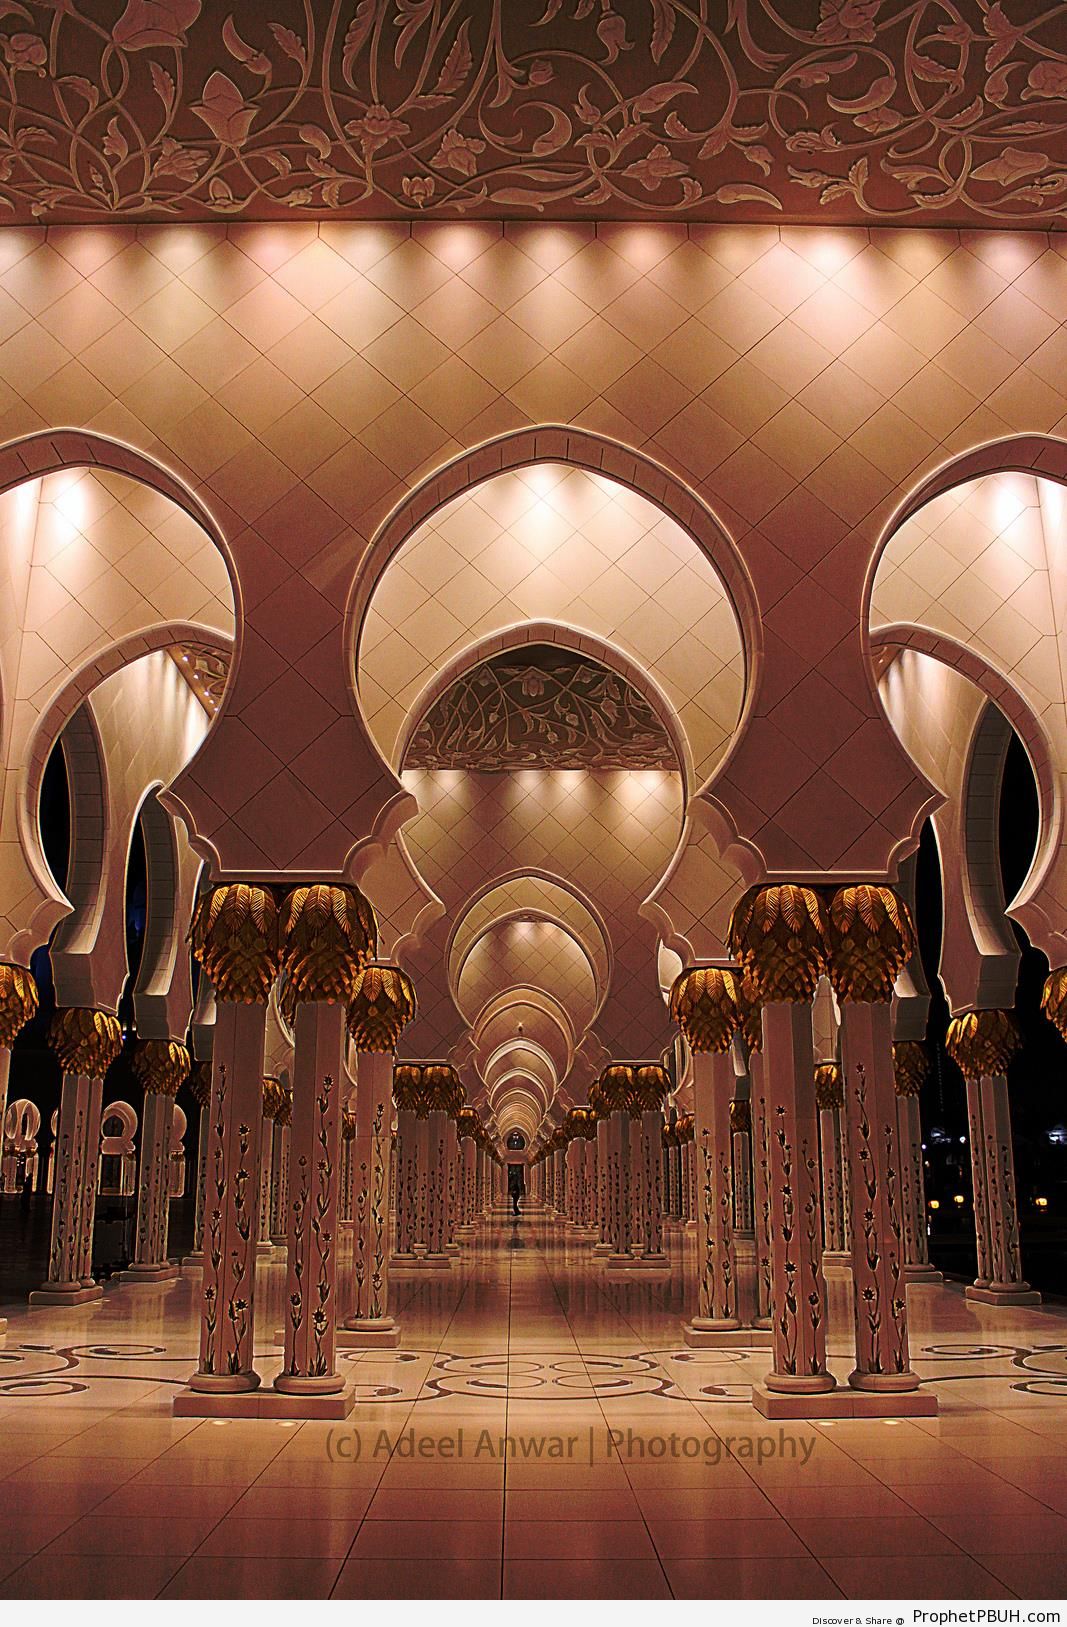 Arches and Columns of Sheikh Zayed Grand Mosque in Abu Dhabi - Abu Dhabi, United Arab Emirates -Picture